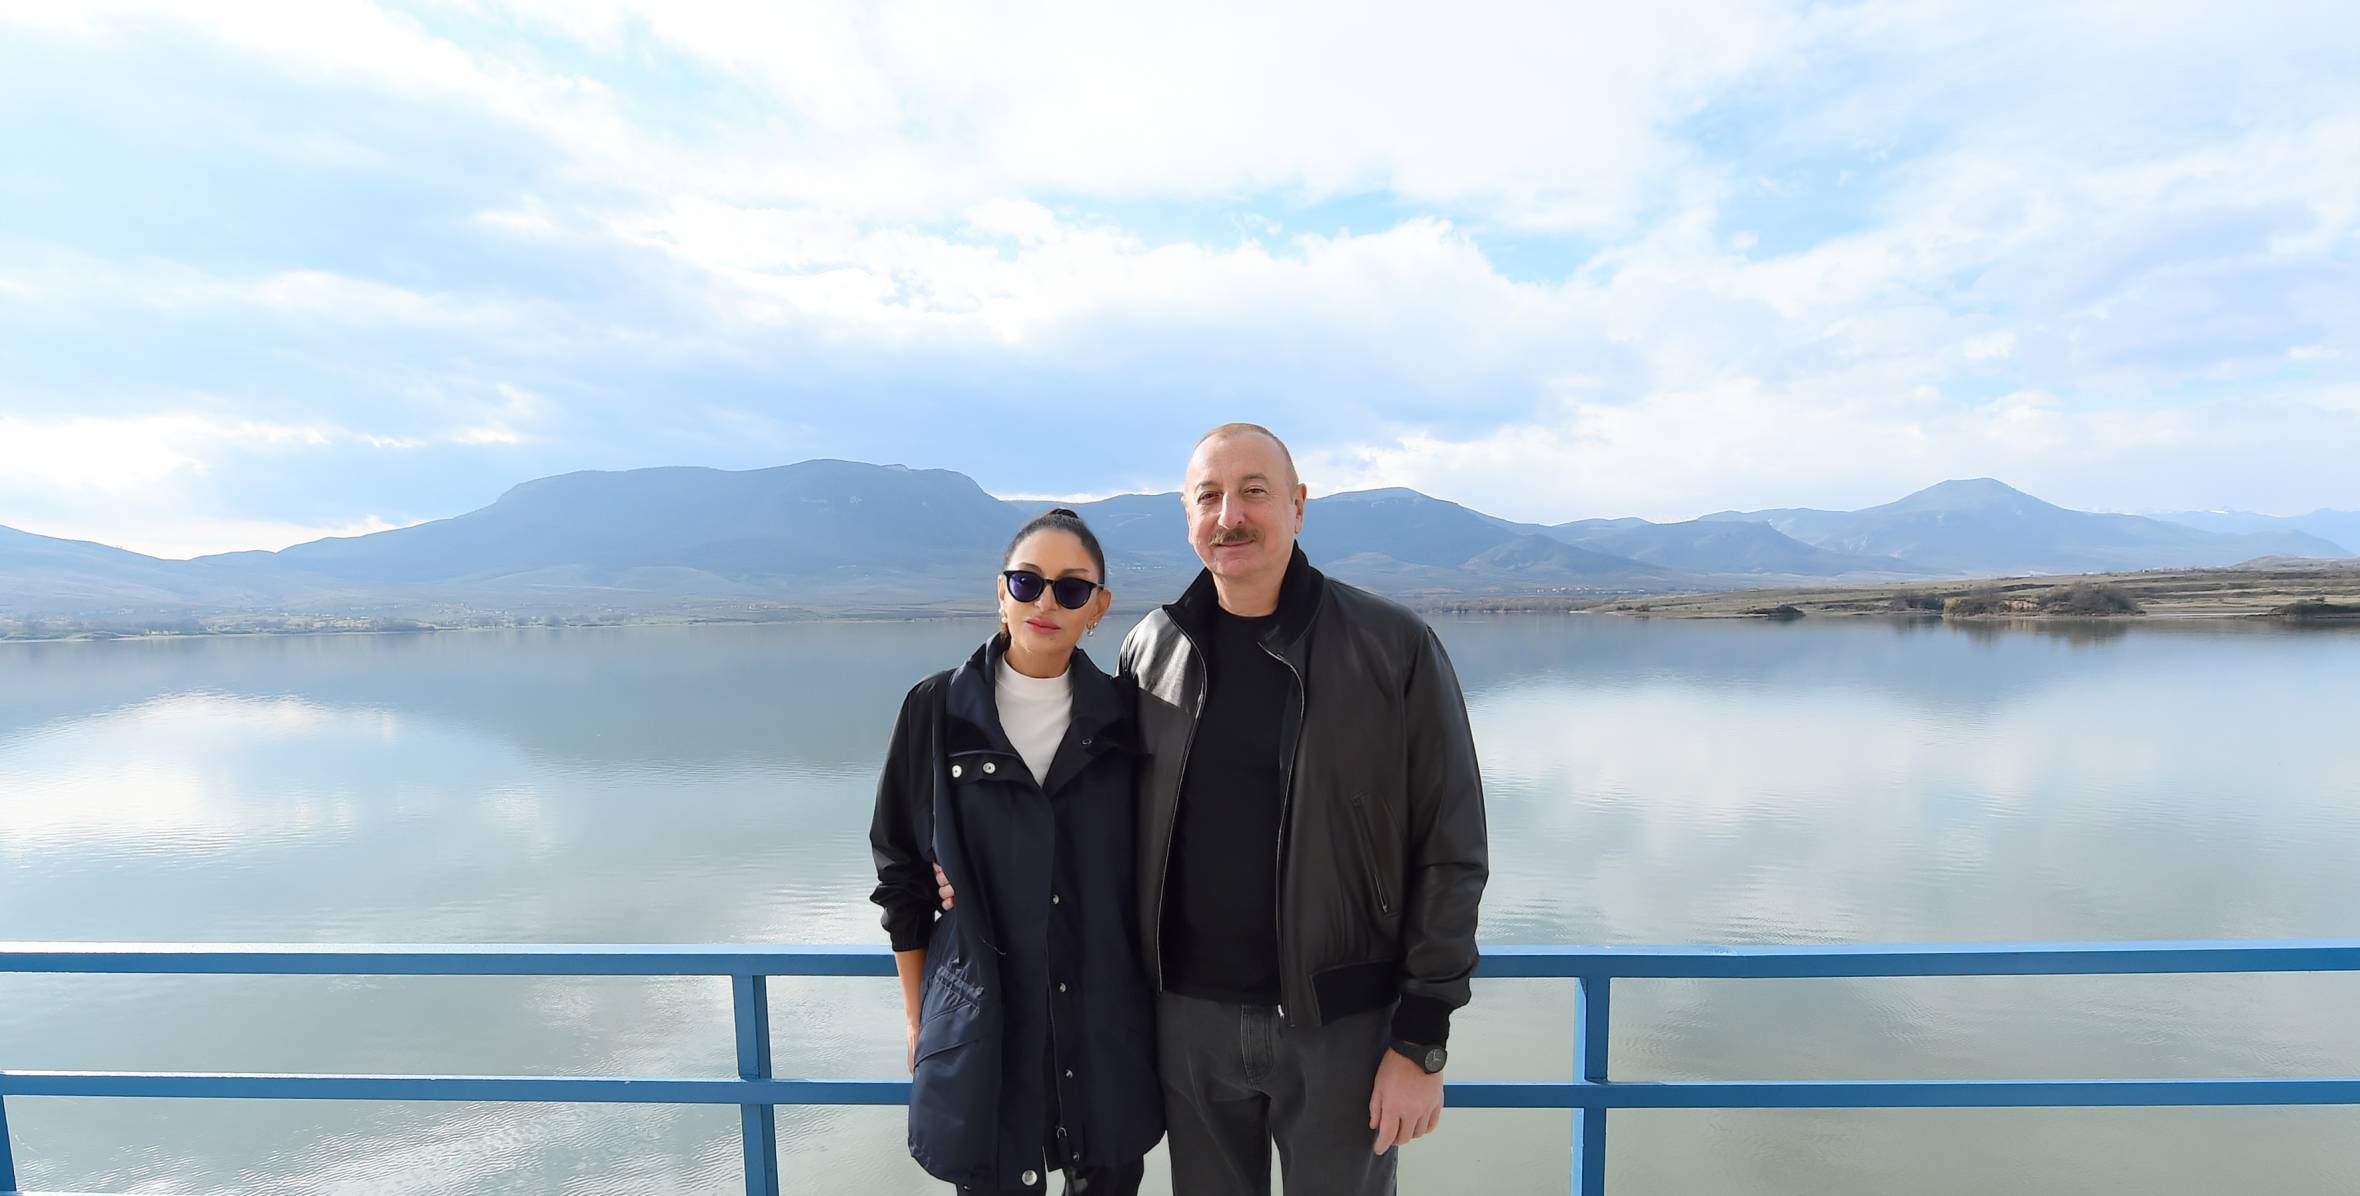 Ilham Aliyev and First Lady Mehriban Aliyeva participated in a ceremony marking the commissioning of the Khachinchay water reservoir in the Aghdam district, following its repair and restoration